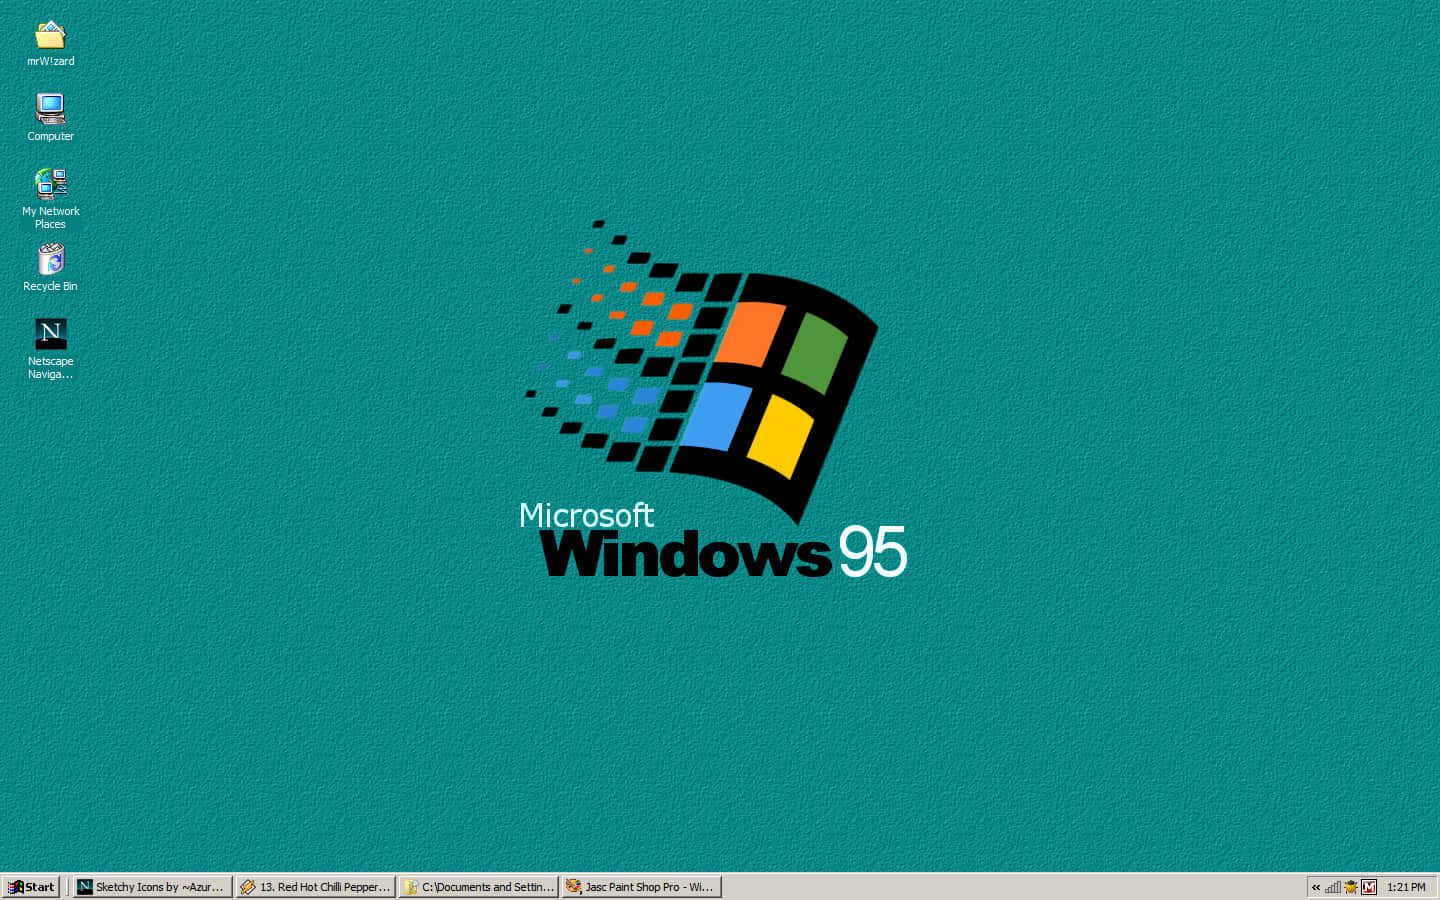 Embrace technological progress with the release of Windows 95